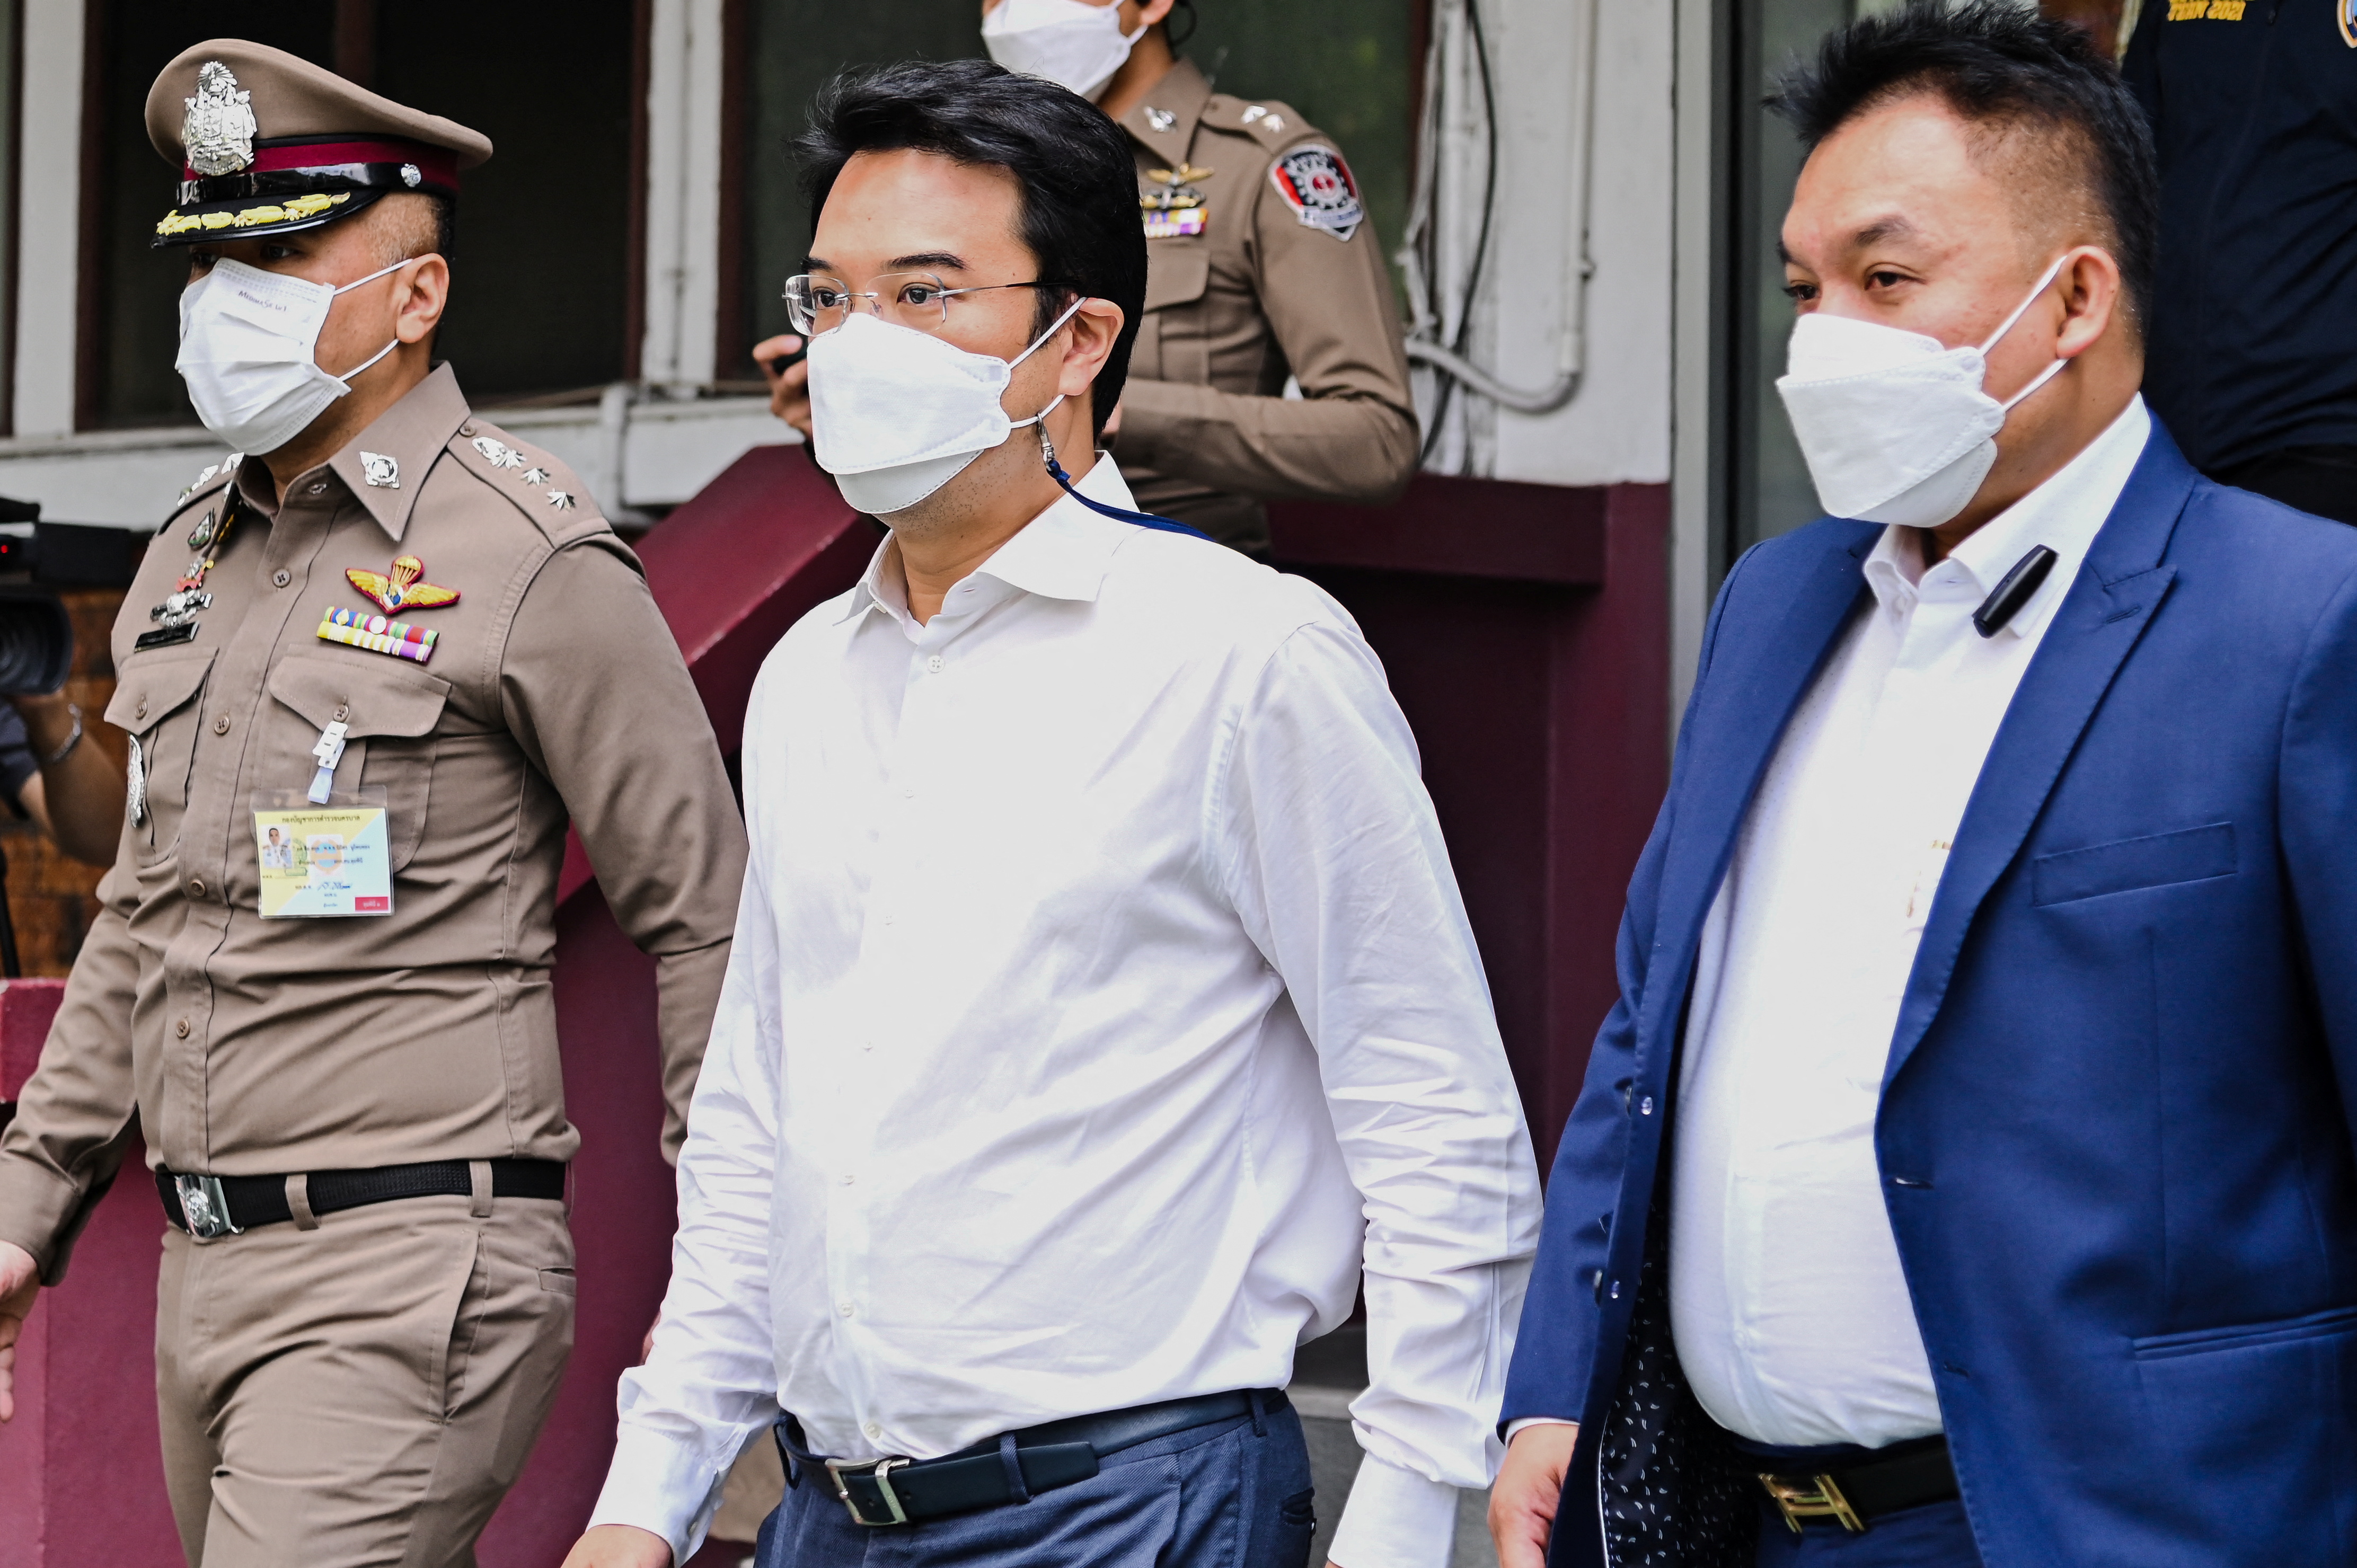 Prinn Panitchpakdi, a former deputy leader of Thailand's Democrat party, facing allegations of sexual misconduct and rape, offences he has previously denied, leaves a police station in Bangkok